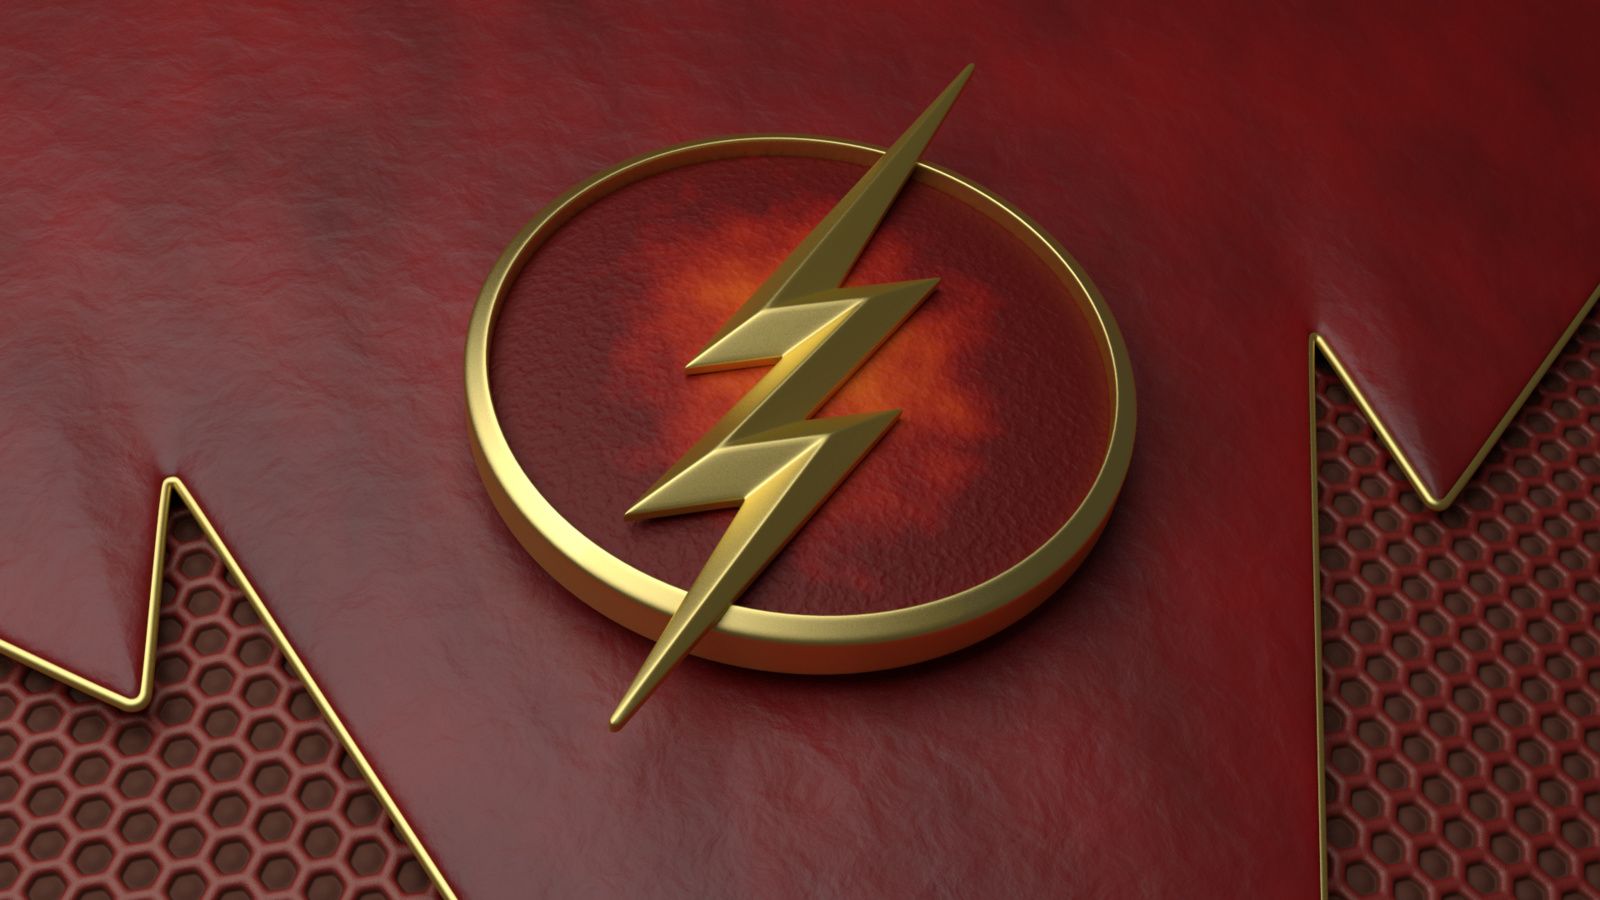 The Flash Wallpapers 1600x900 - Album on Imgur